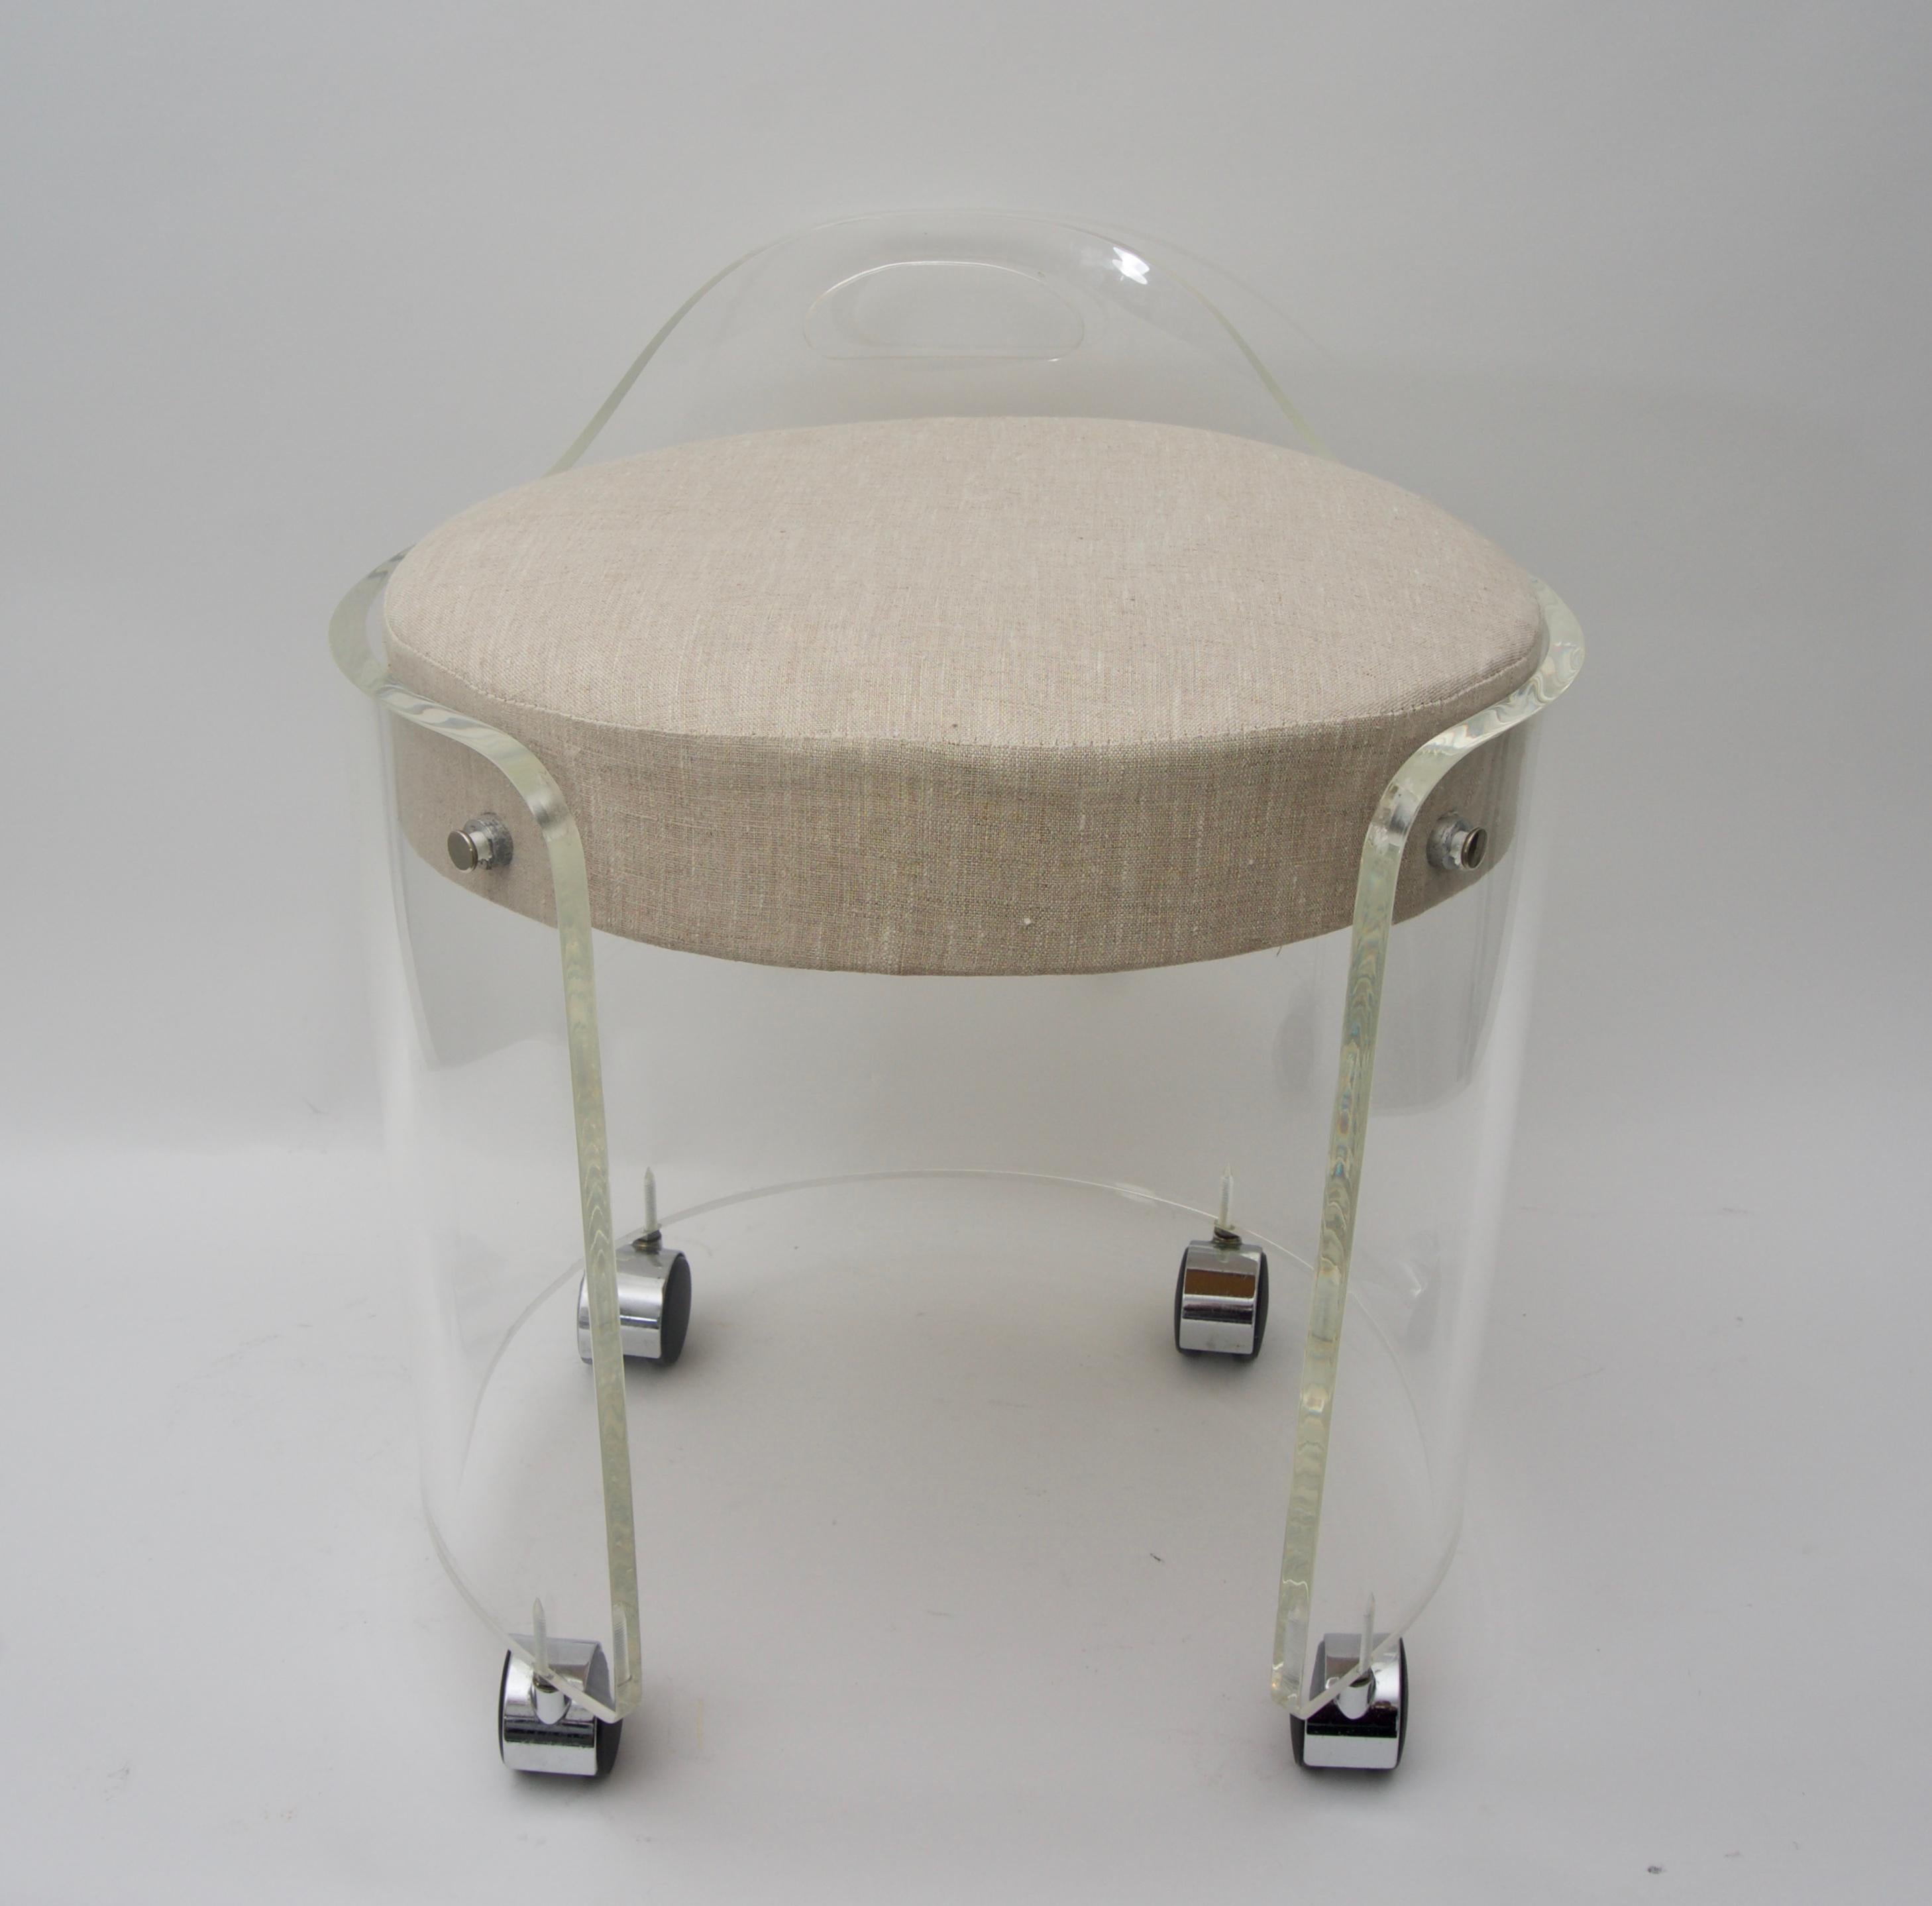 This stylish Lucite vanity chair is by Charles Hollis Jones and dates to the 1970s and has been professionally polished and reupholstered in a woven linen fabric.